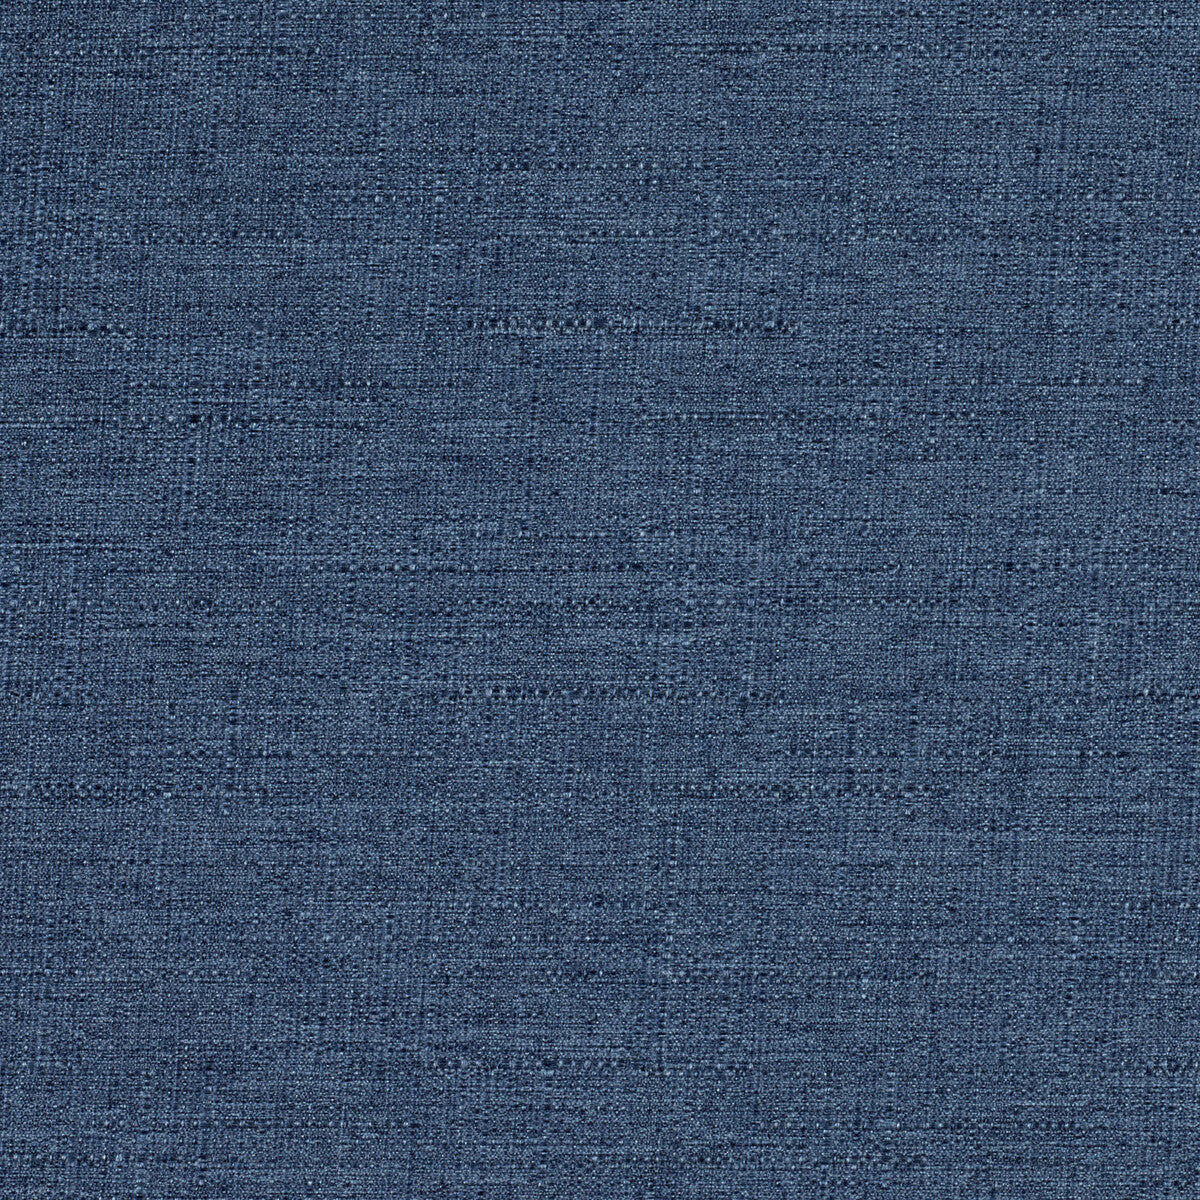 Kravet Contract fabric in 4321-5 color - pattern 4321.5.0 - by Kravet Contract